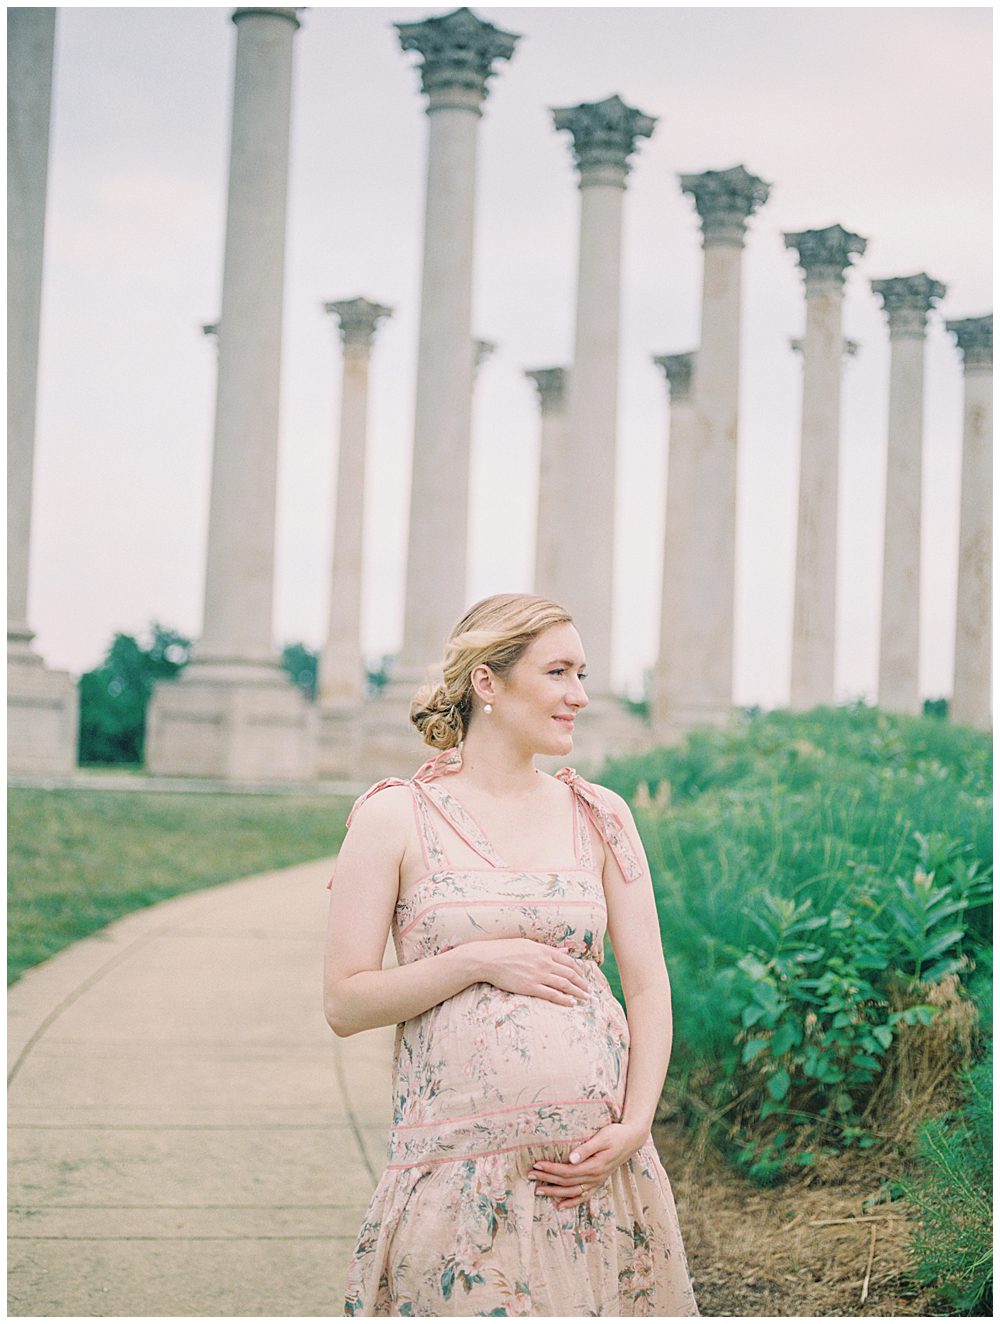 Pregnant mother in pink Zimmerman dress stands in front of National Arboretum columns with hands on her belly as the wind blows.